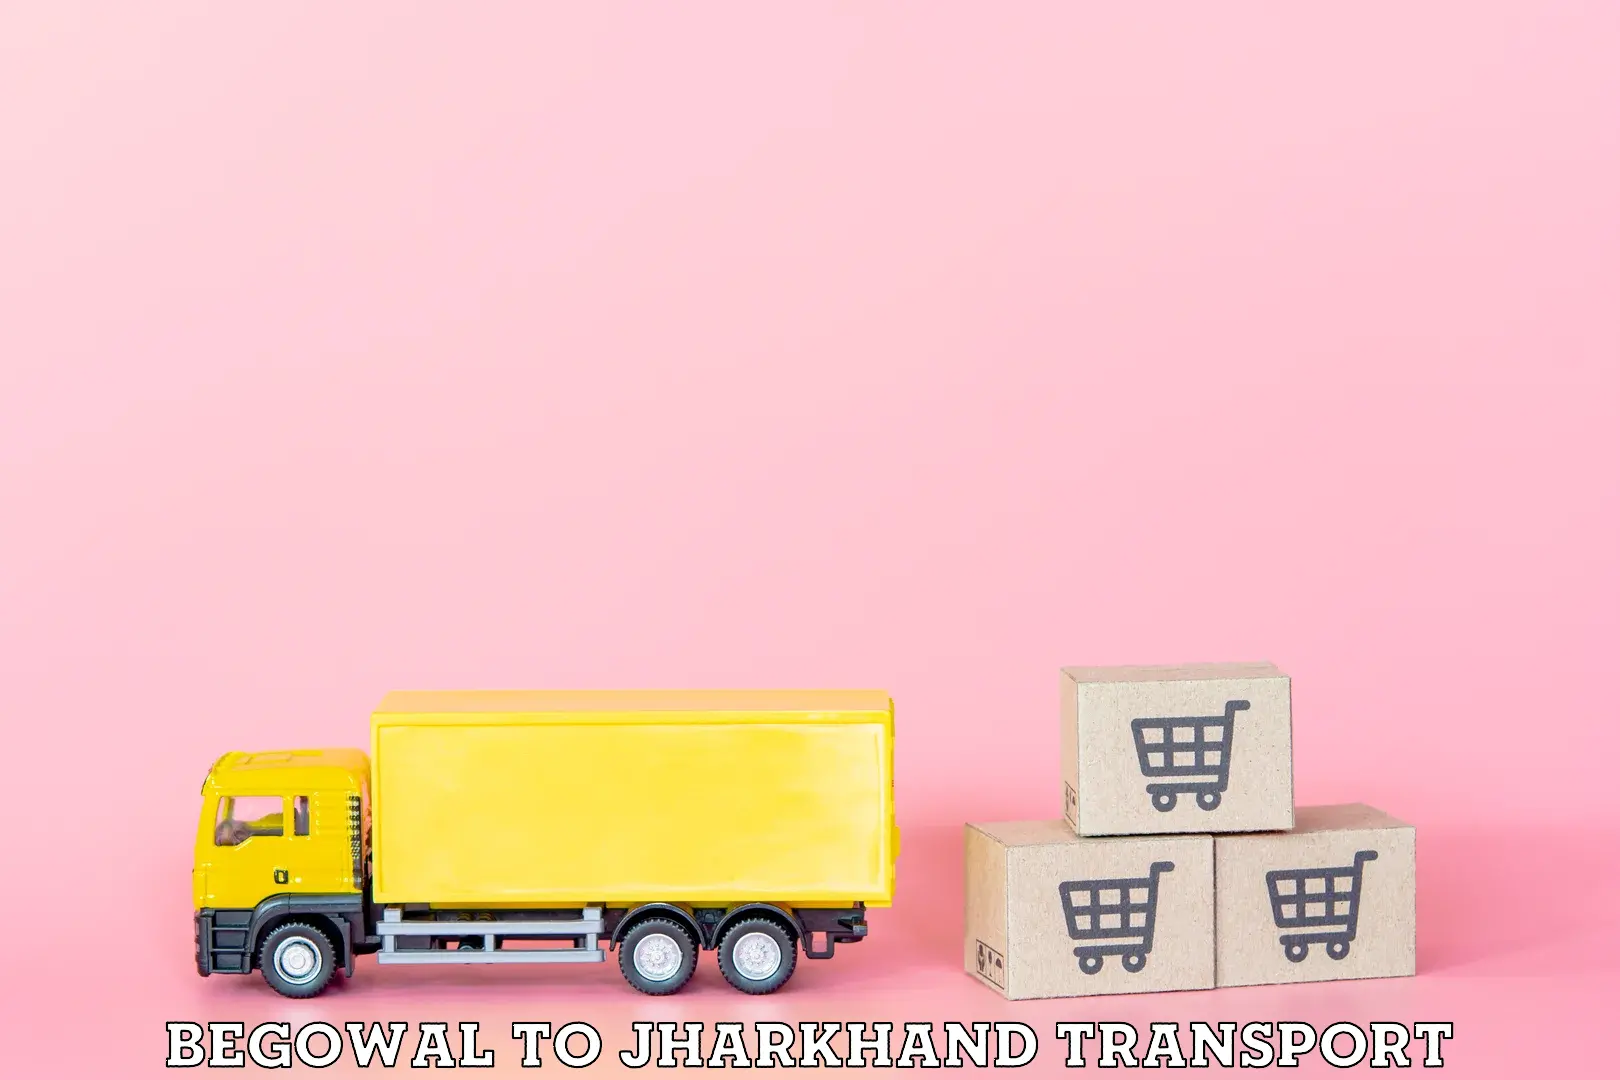 Truck transport companies in India Begowal to Poreyahat